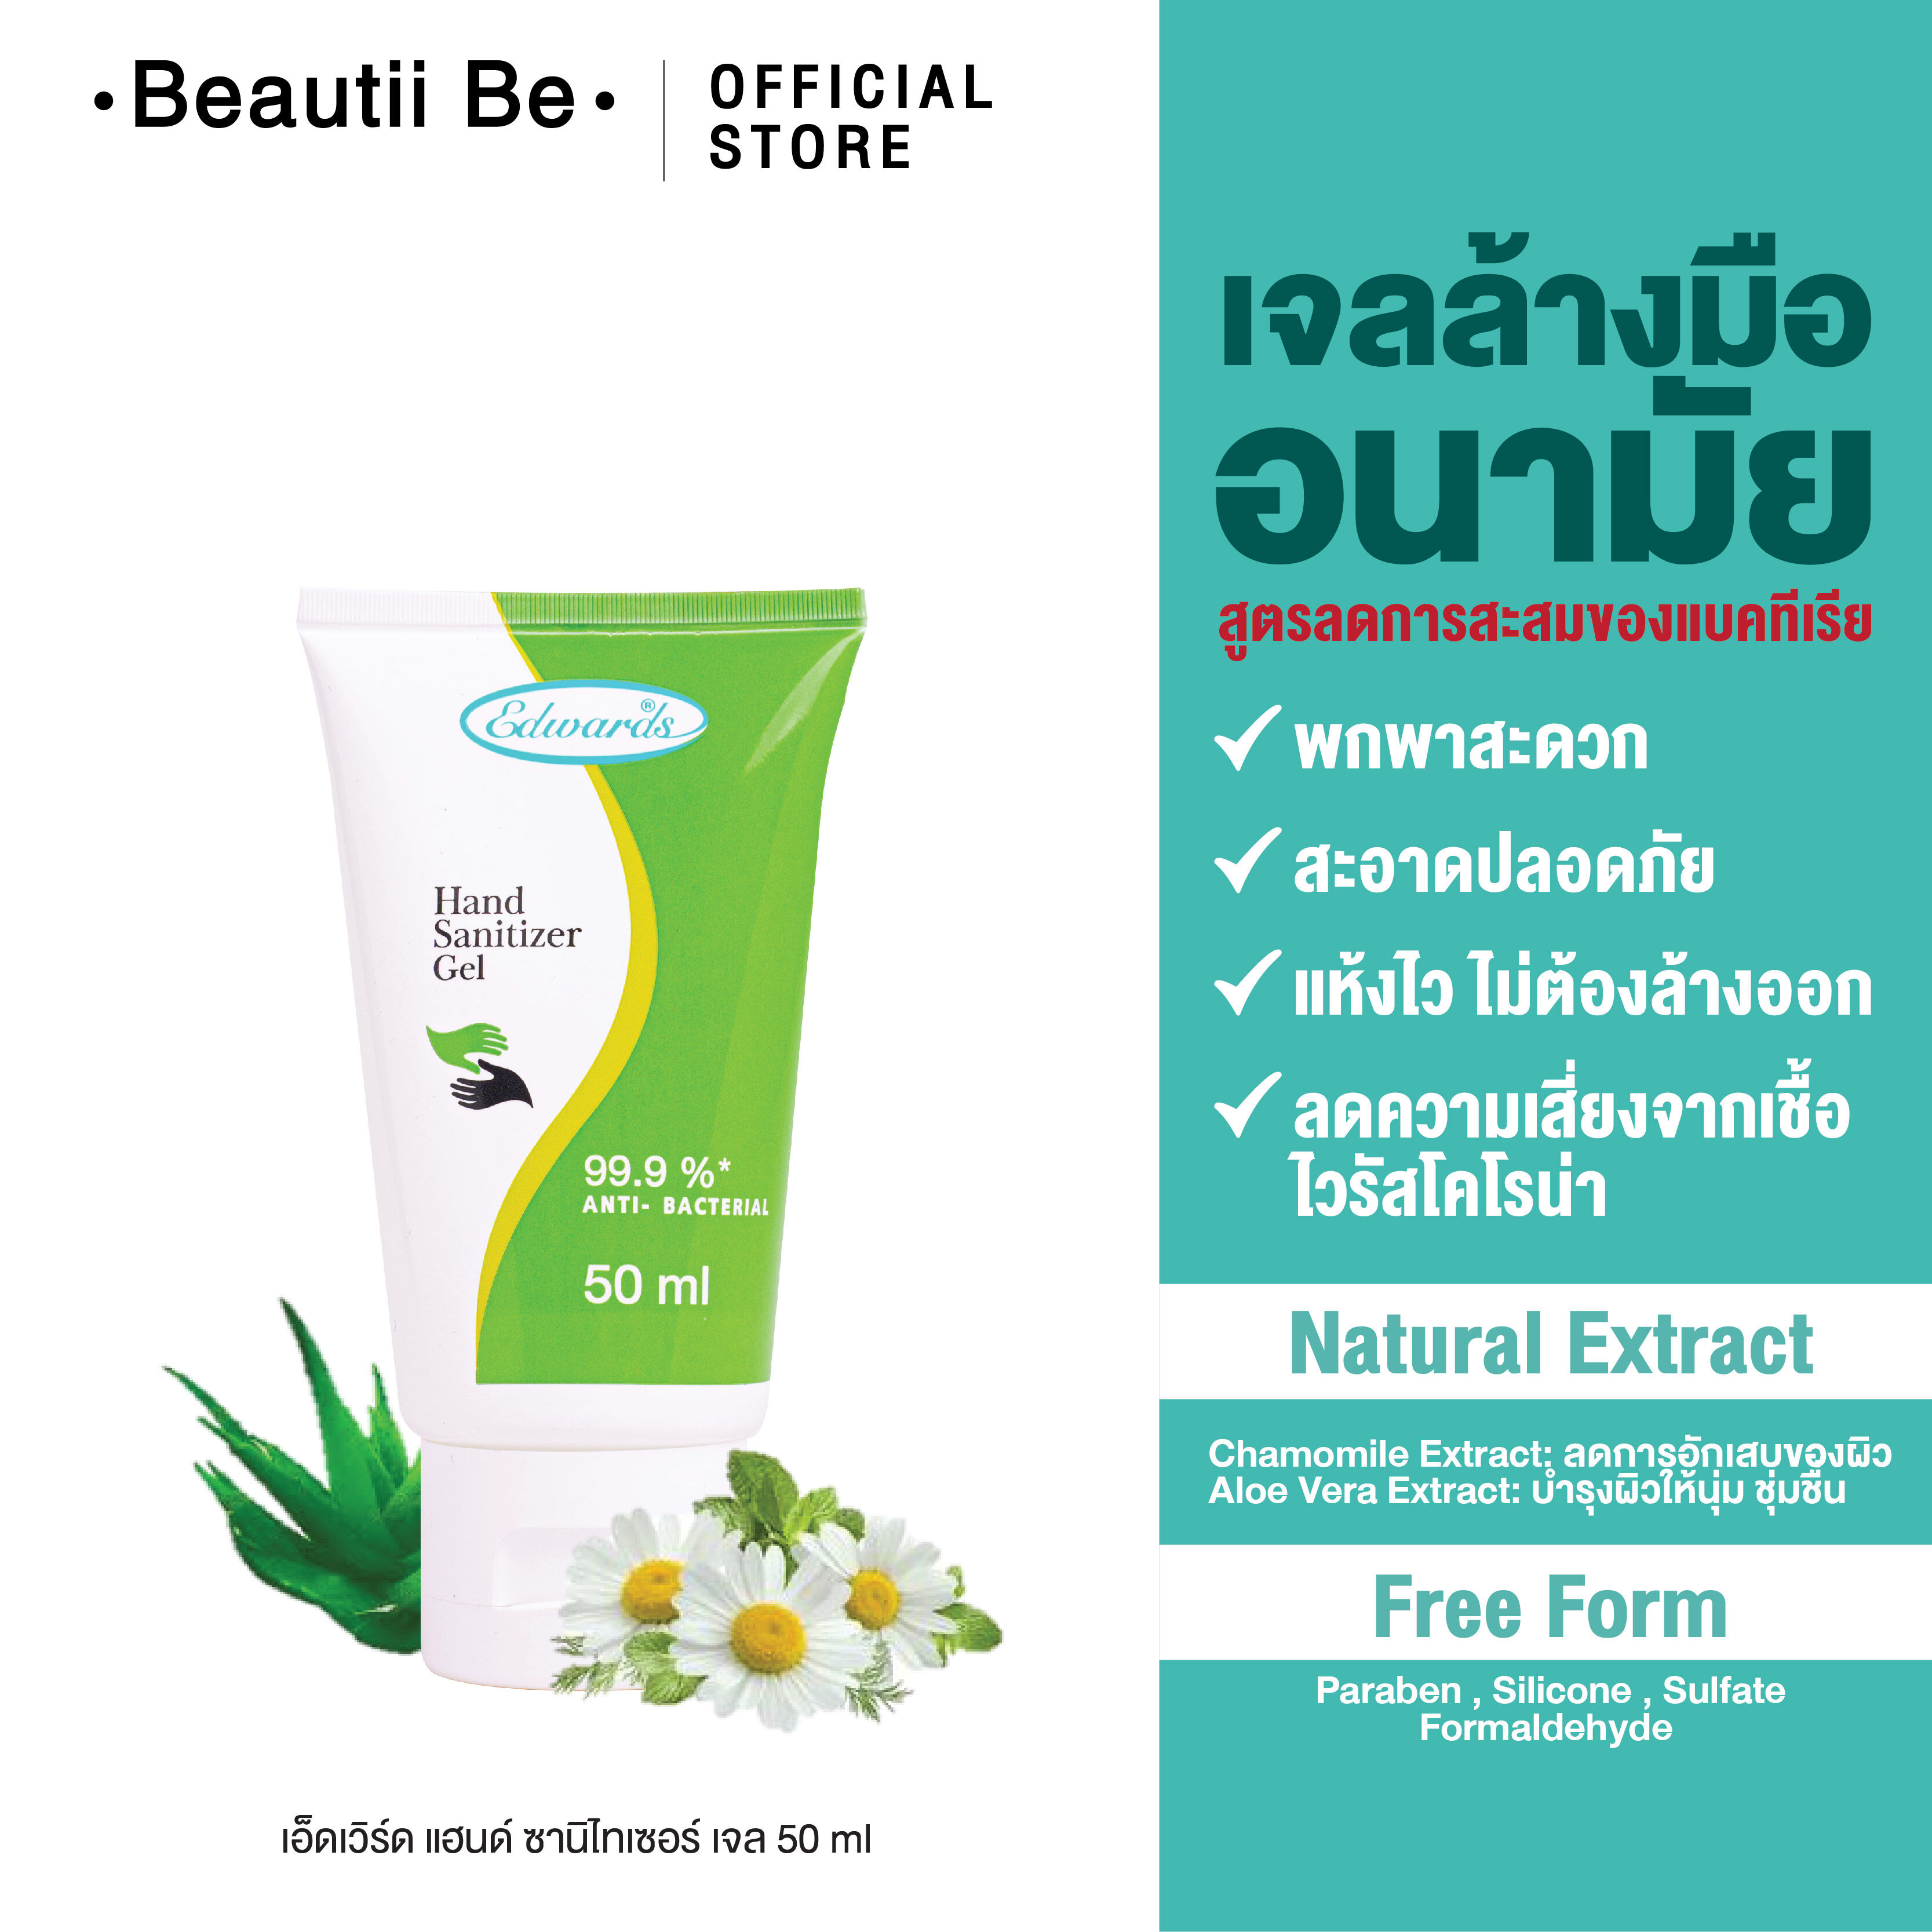 Beautii Be - Edwards Hand Sanitizer Gel 70% [50ml.] เจลล้างมือ 99.9% Anti Bacterial